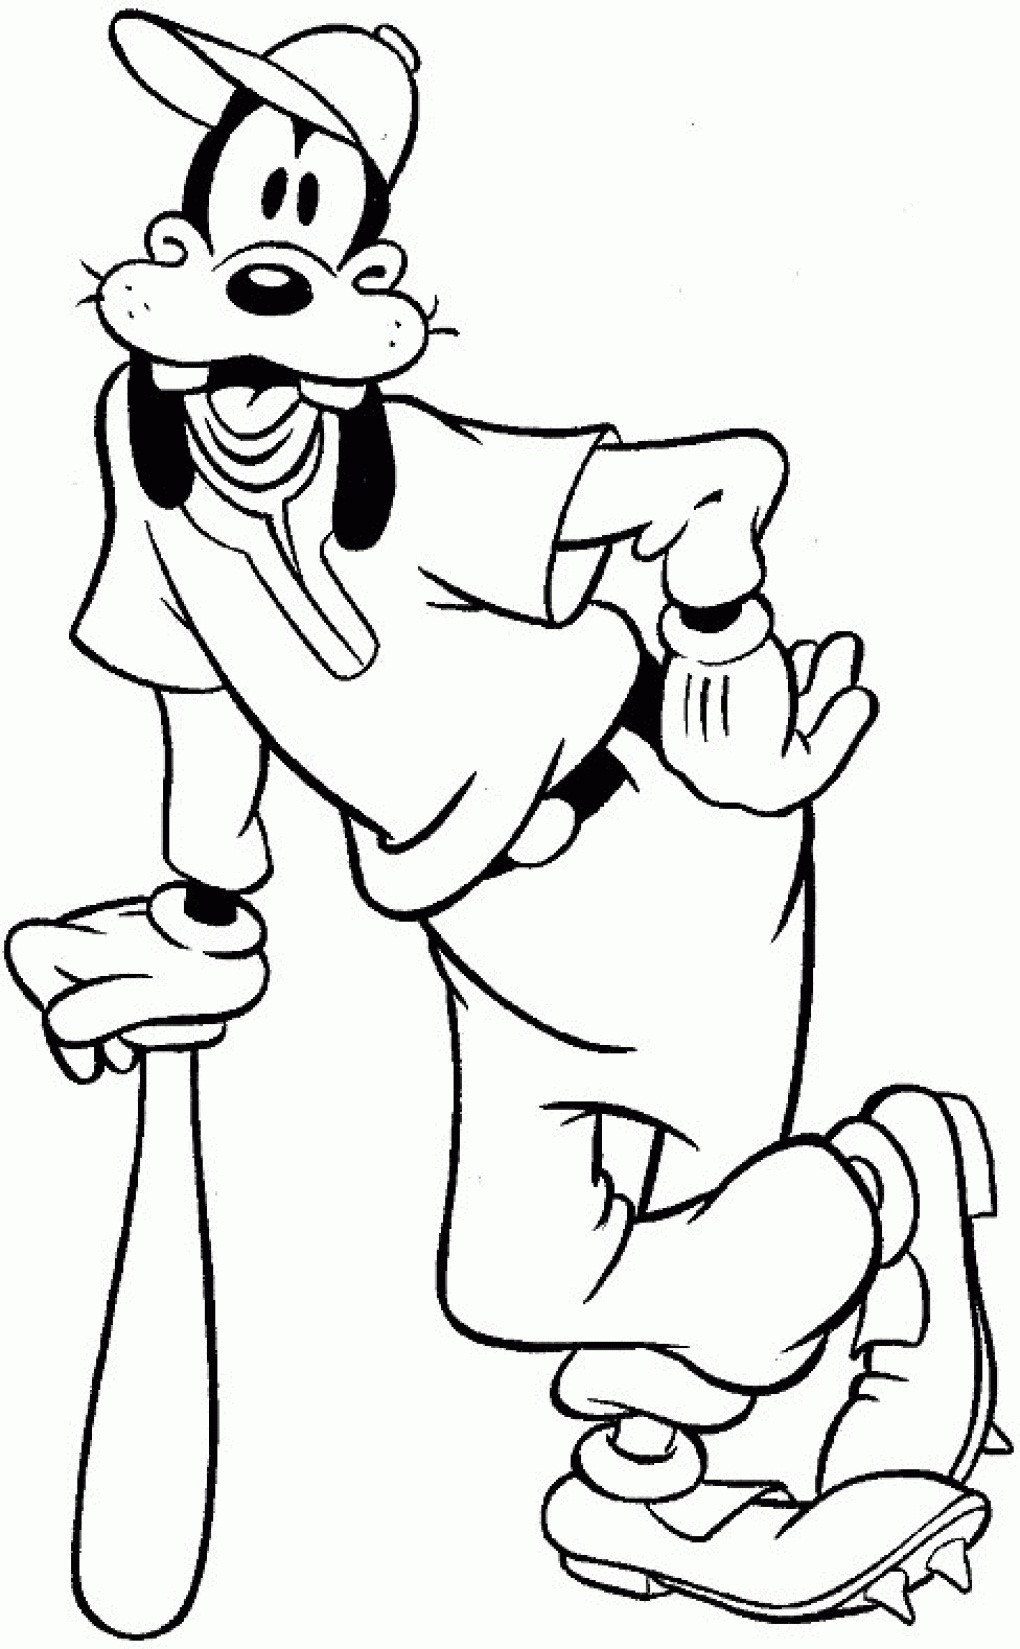 Kids Coloring Pages Online
 Free Printable Goofy Coloring Pages For Kids